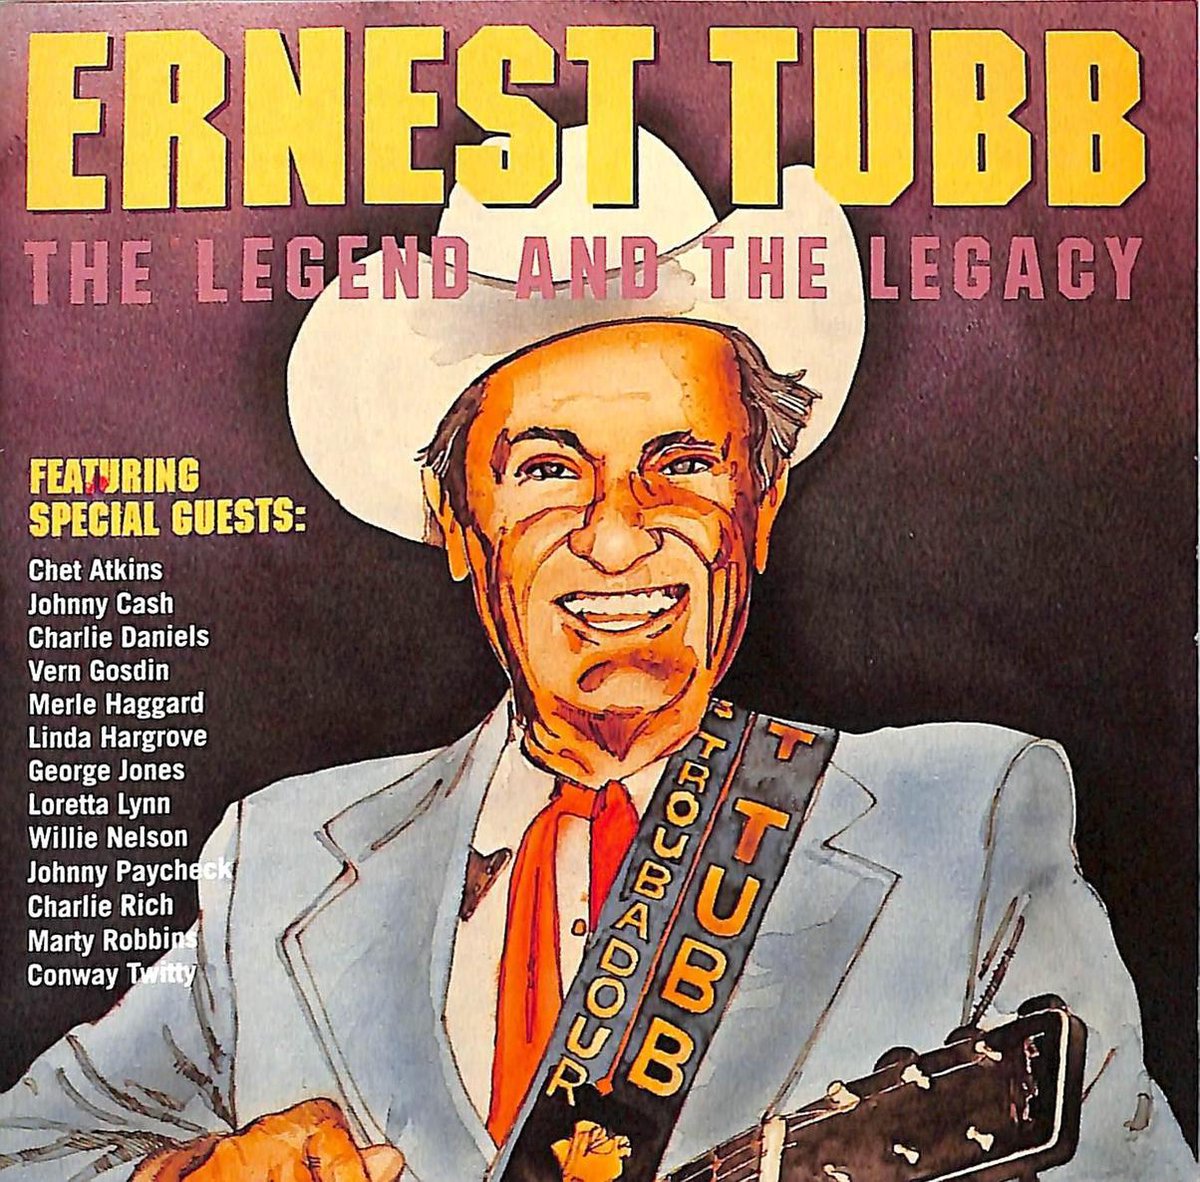 Legend and the Legacy - Ernest Tubb